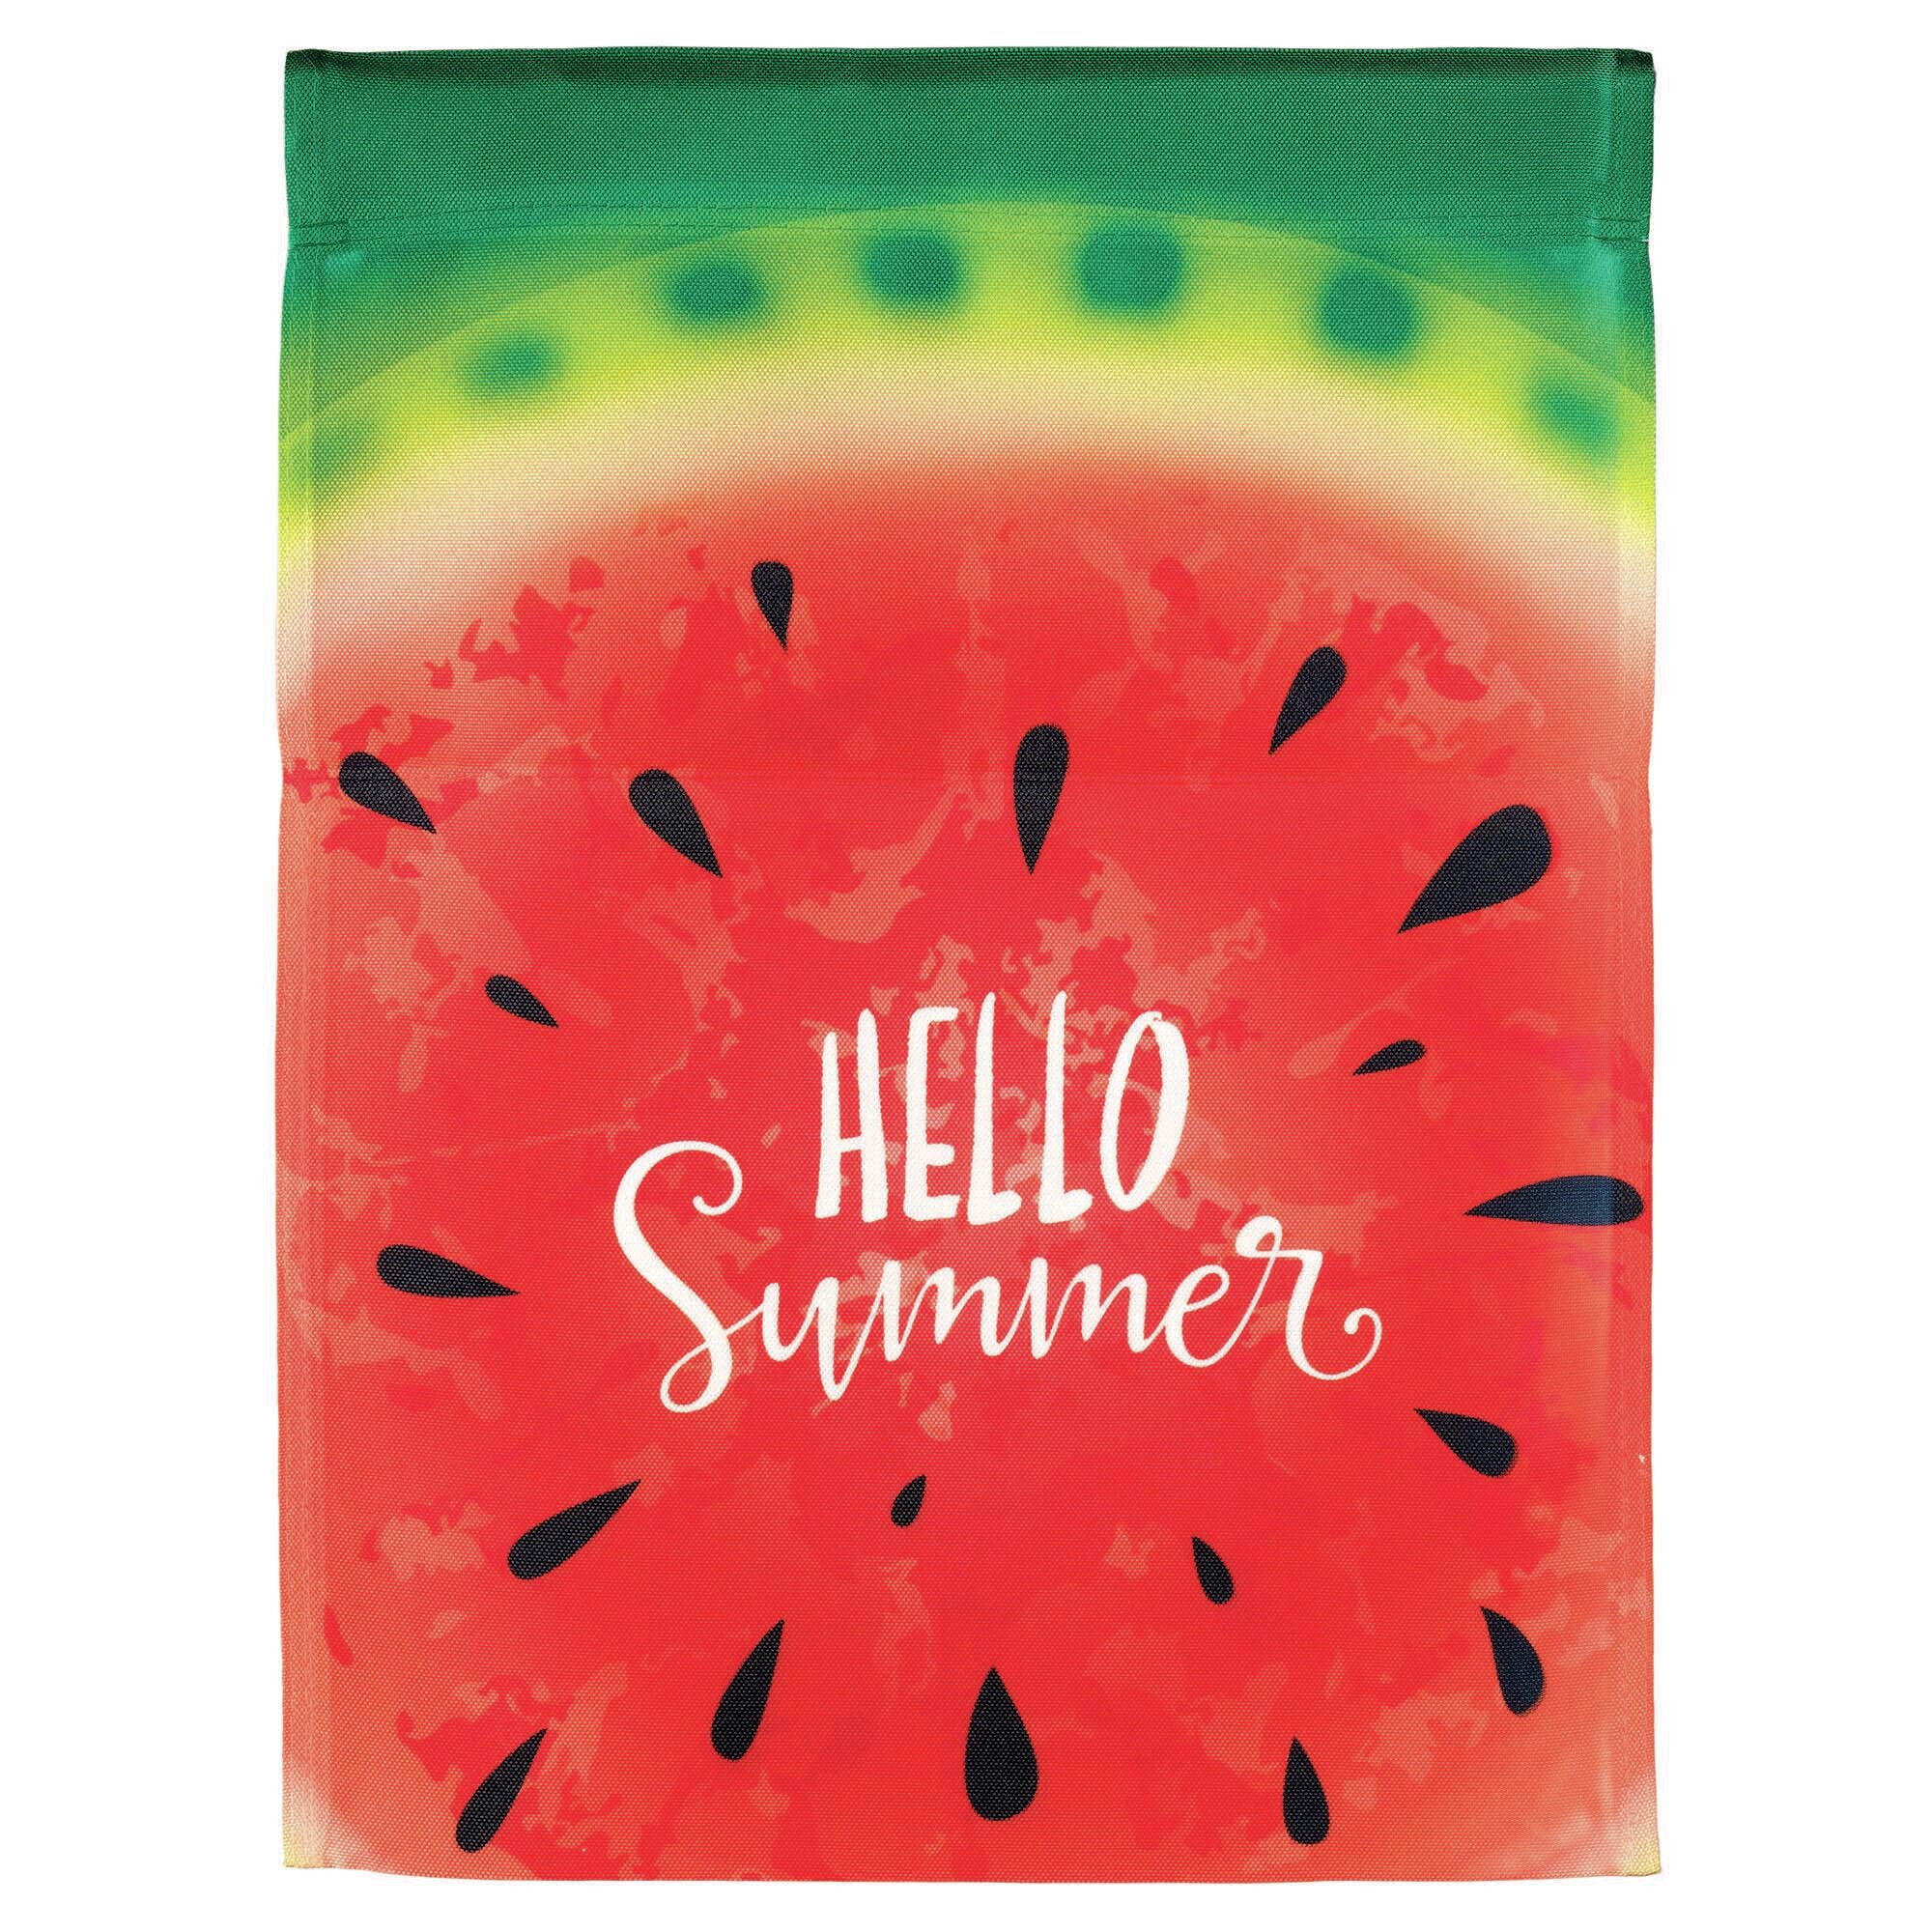 LiveHappy Summer Vibes Summertime Seasonal Watermelon Watercolor Throw Pillow 18x18 Multicolor